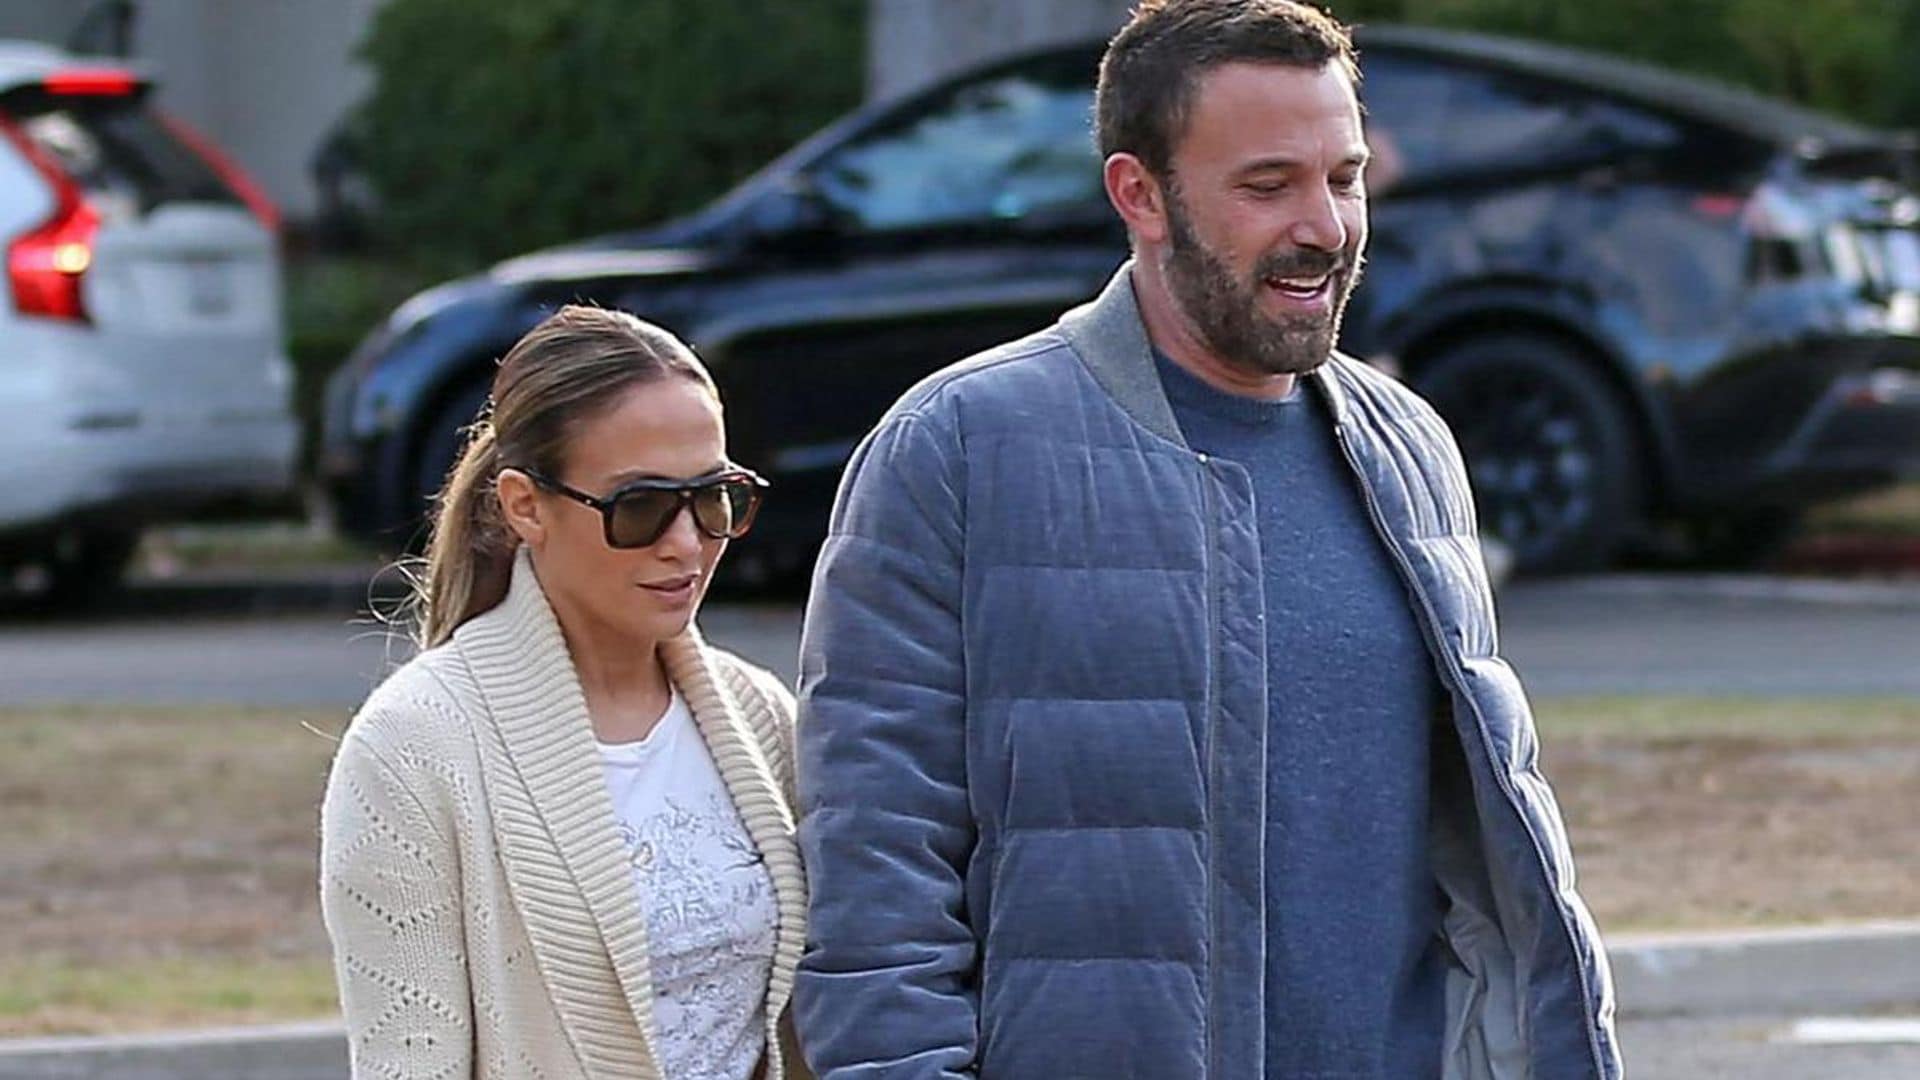 Jennifer Lopez and Ben Affleck share passionate kiss during morning walk in Los Angeles